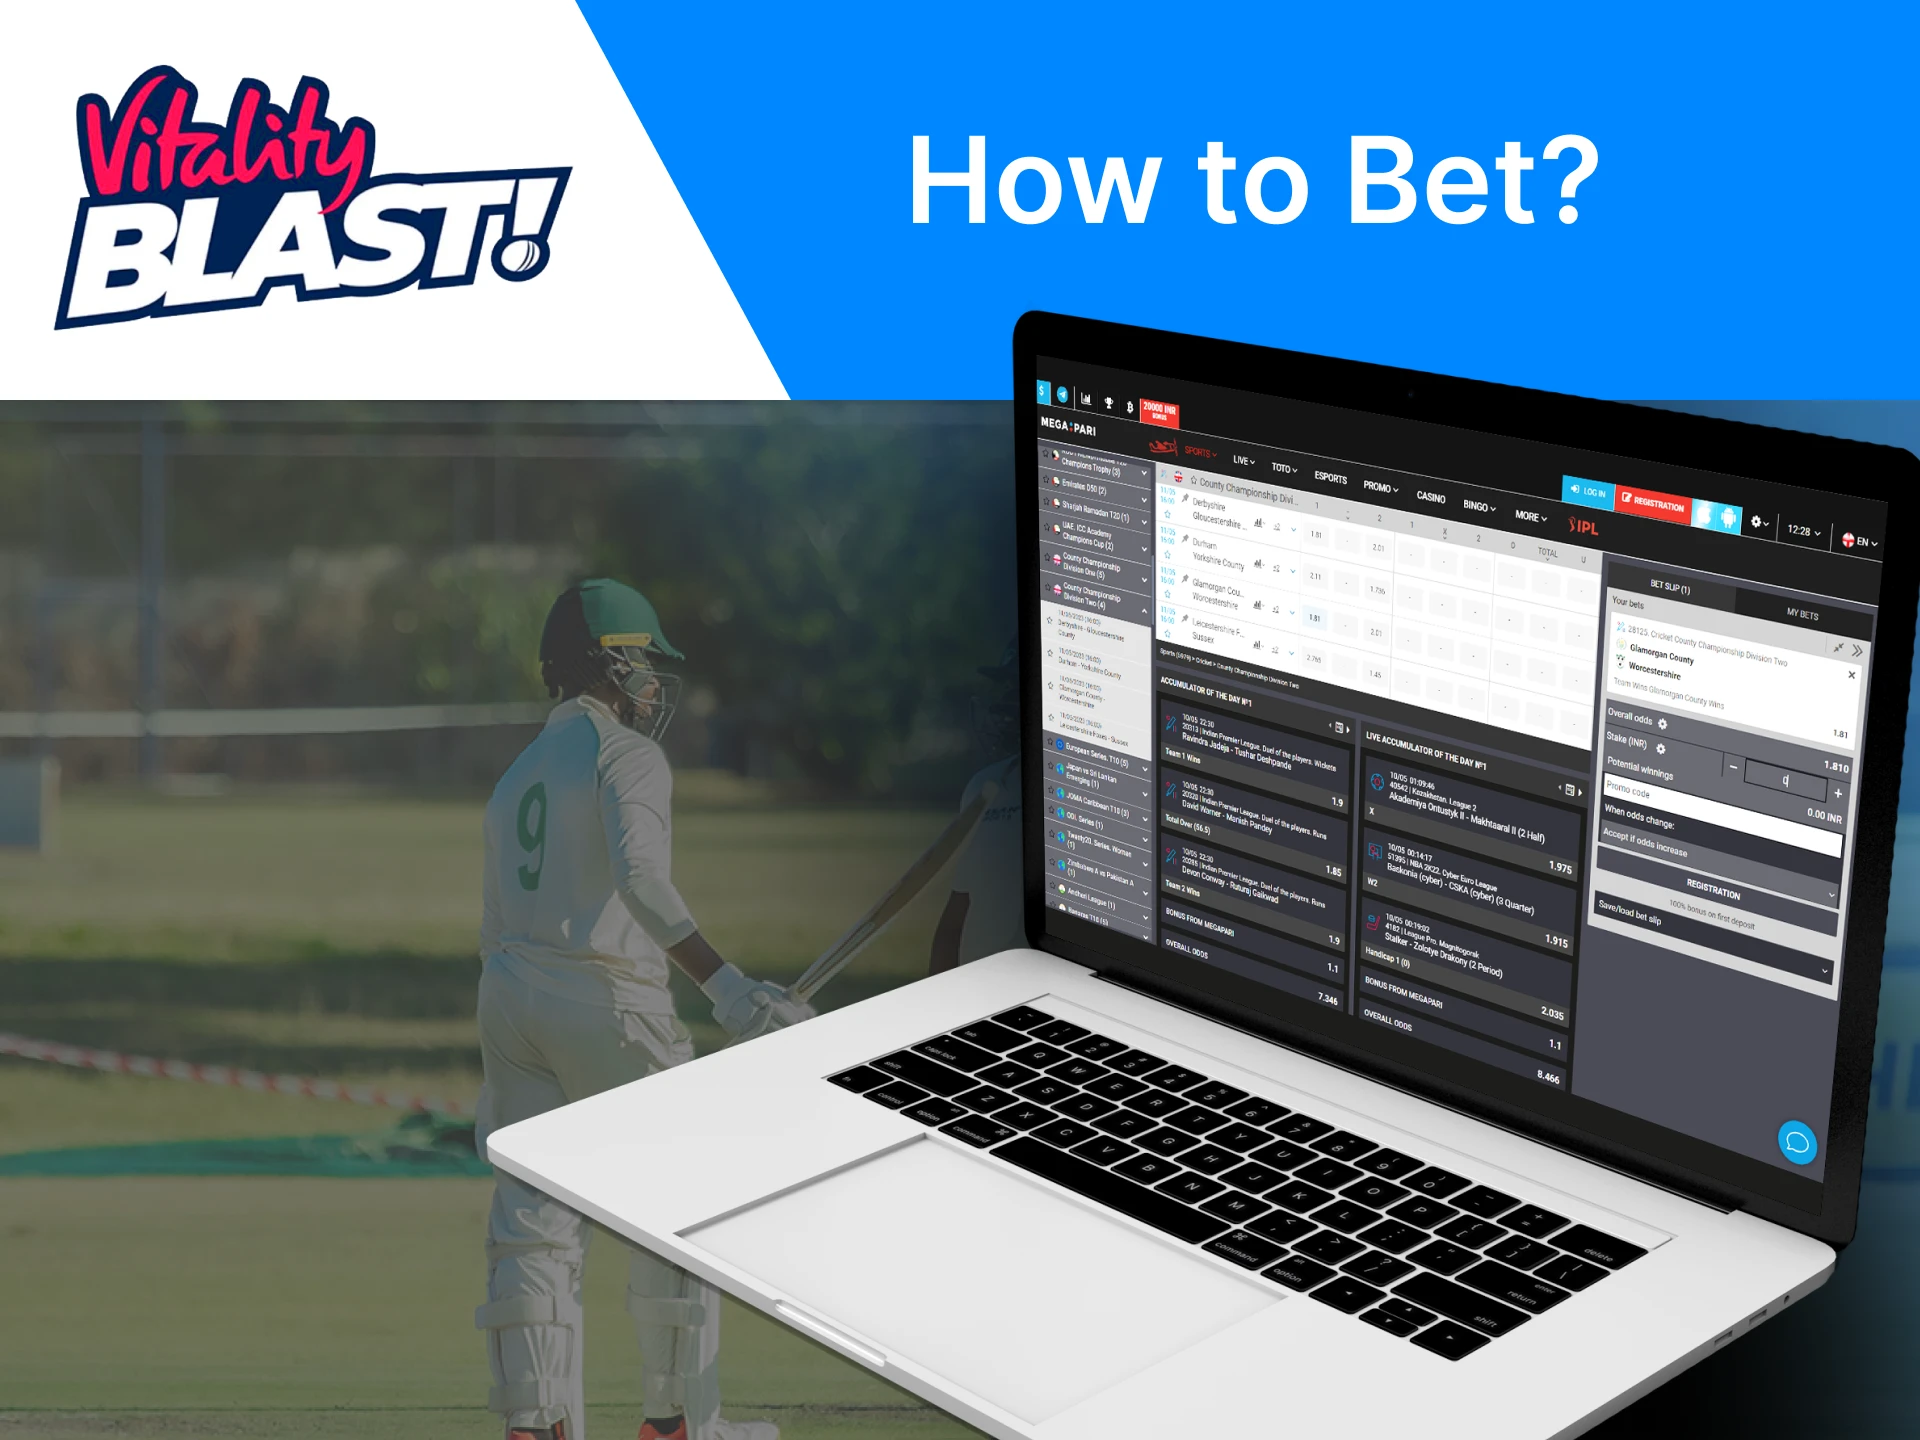 Choose a bookmaker, visit its site and make a prediction of one of the T20 Blast matches.